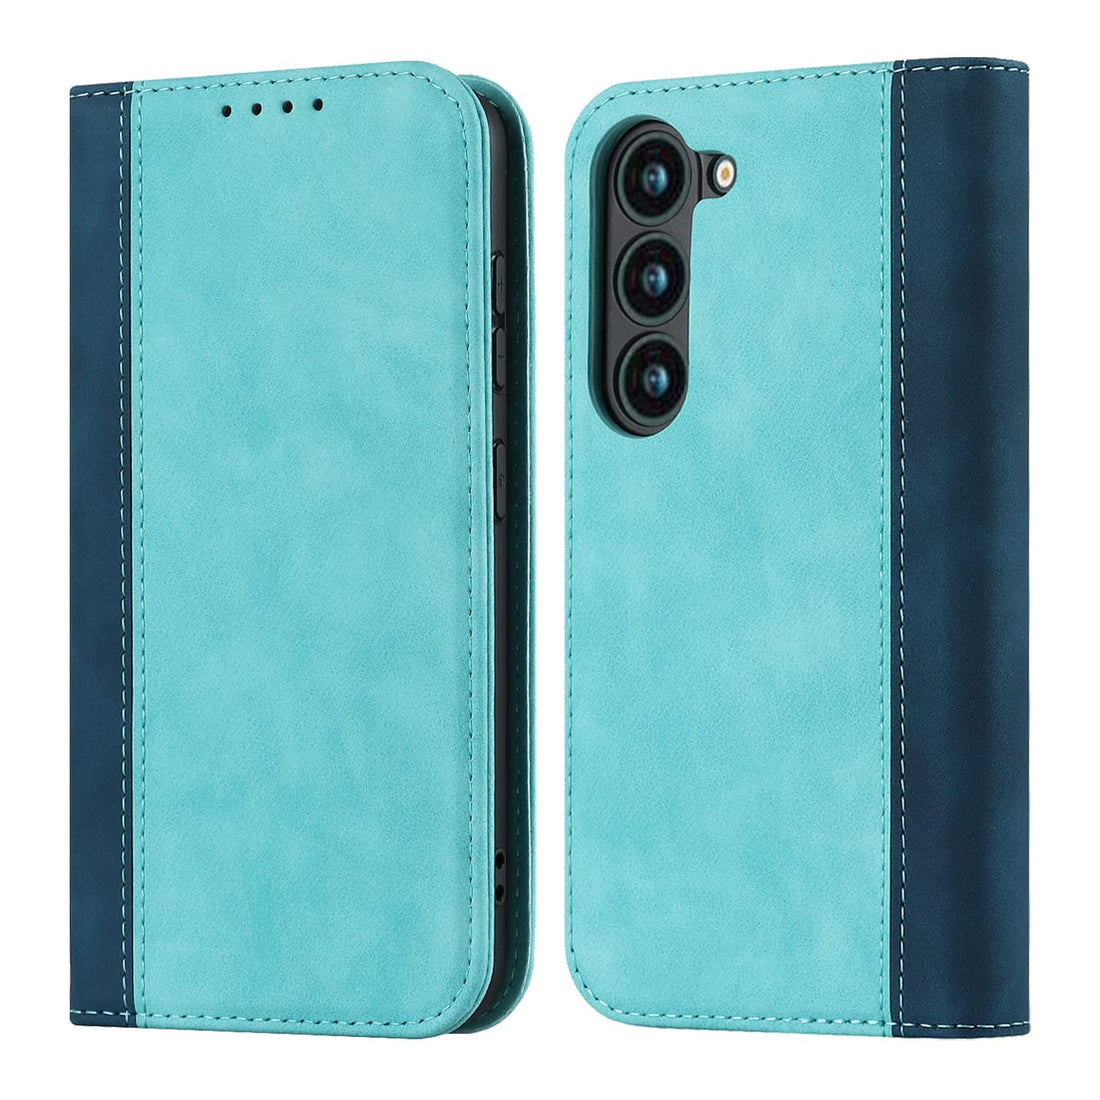 Ｈａｖａｙａ for Samsung Galaxy S23 FE Case Wallet with Card Holder Samsung s23 fe Phone Case for Women Flip Folio Leather Cover with Credit Card Slots for Men-Light Blue and Dark Blue